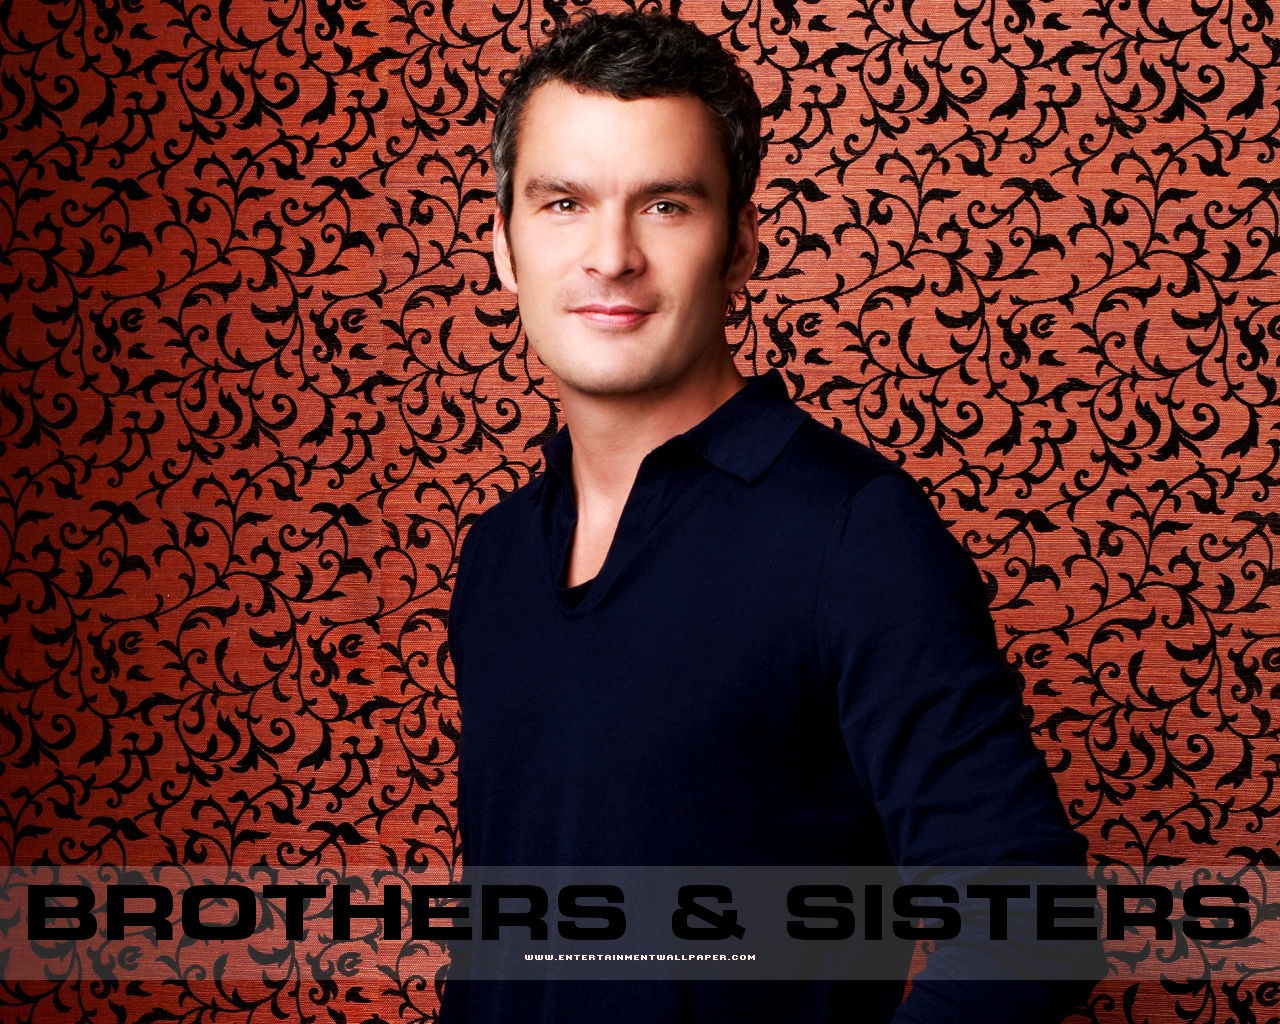 Brothers & Sisters 兄弟姐妹17 - 1280x1024